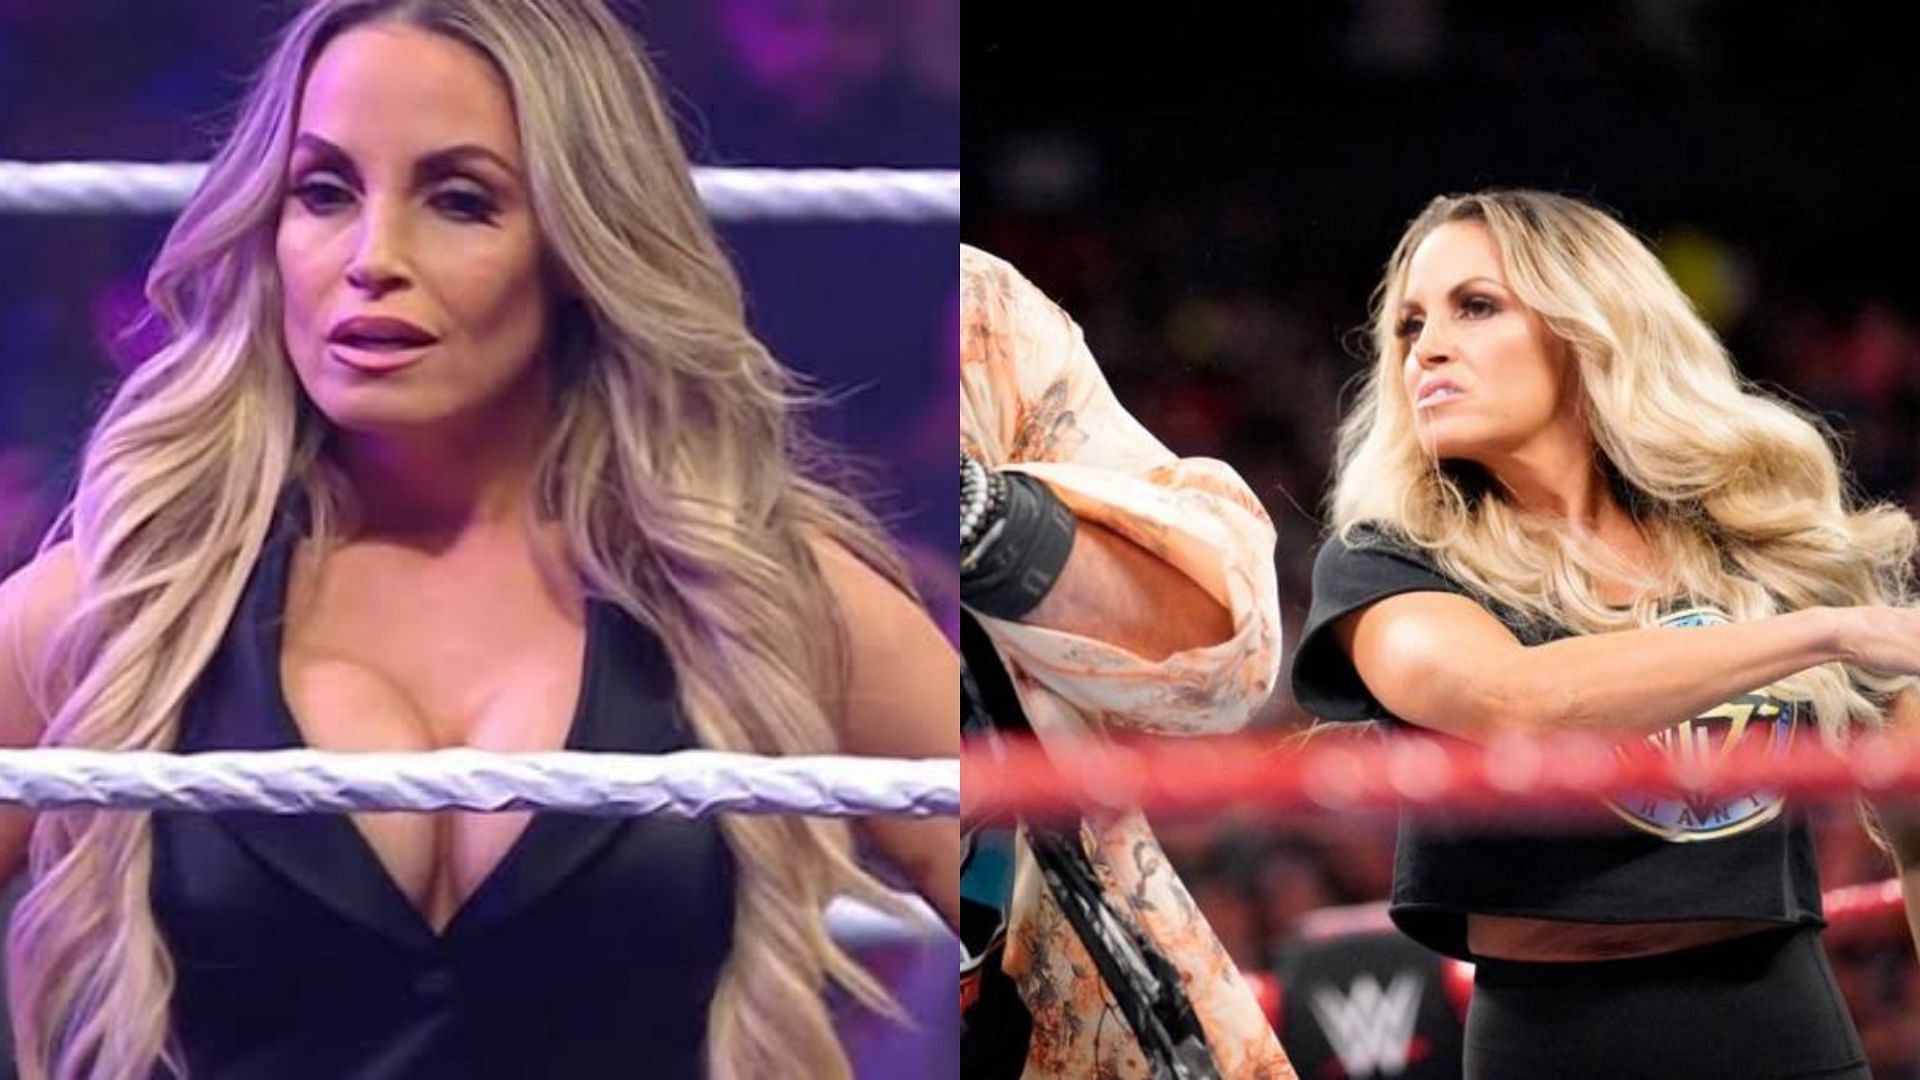 Trish Stratus is currently feuding with Becky Lynch in WWE